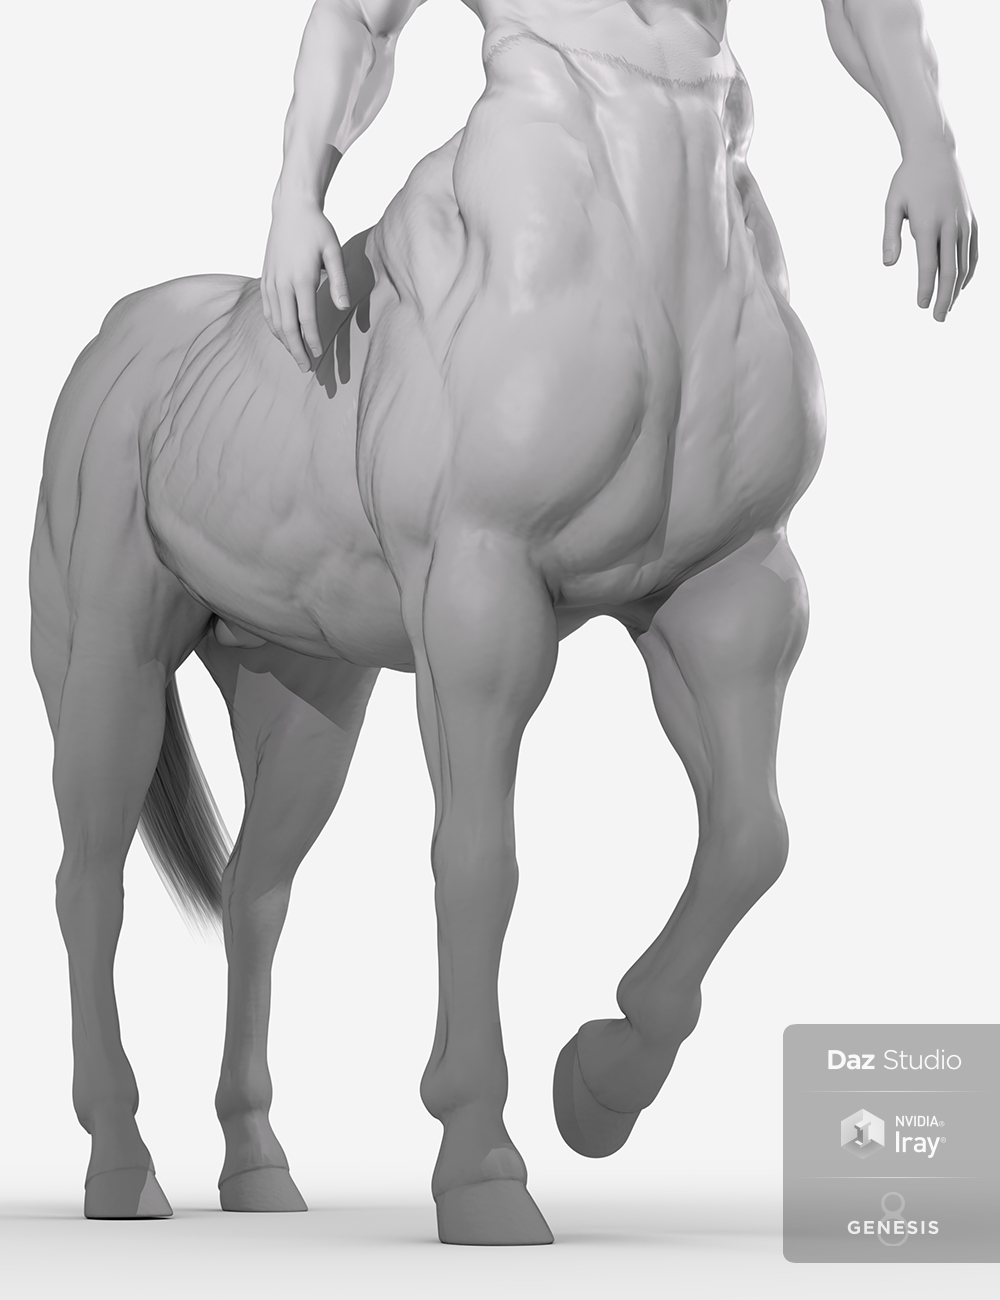 HD Physique Shaping for Genesis 8 Male Centaur by: Sixus1 Media, 3D Models by Daz 3D